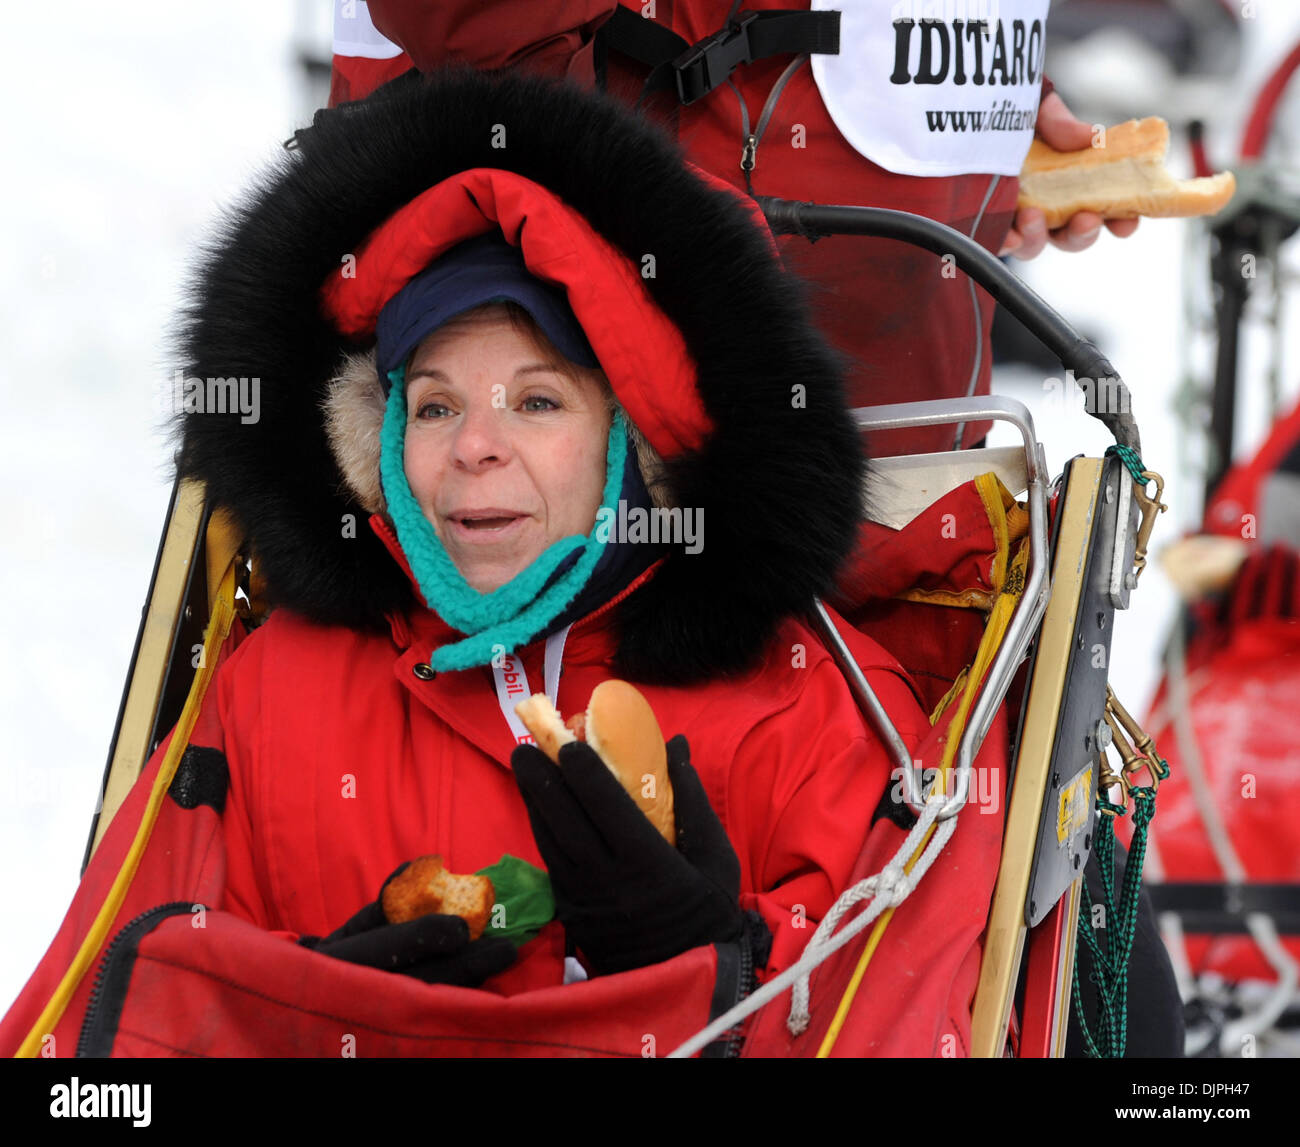 Mar 06, 2010 - Anchorage, Alaska, USA - Iditarider PATRICIA KENNEDY of Chicago winds up with a muffin and a hot dog at mile four where the trail runs adjacent to Wesleyan Drive during the Iditarod's ceremonial start Saturday morning. (Credit Image: © Erik Hill/Anchorage Daily News/ZUMA Press) Stock Photo